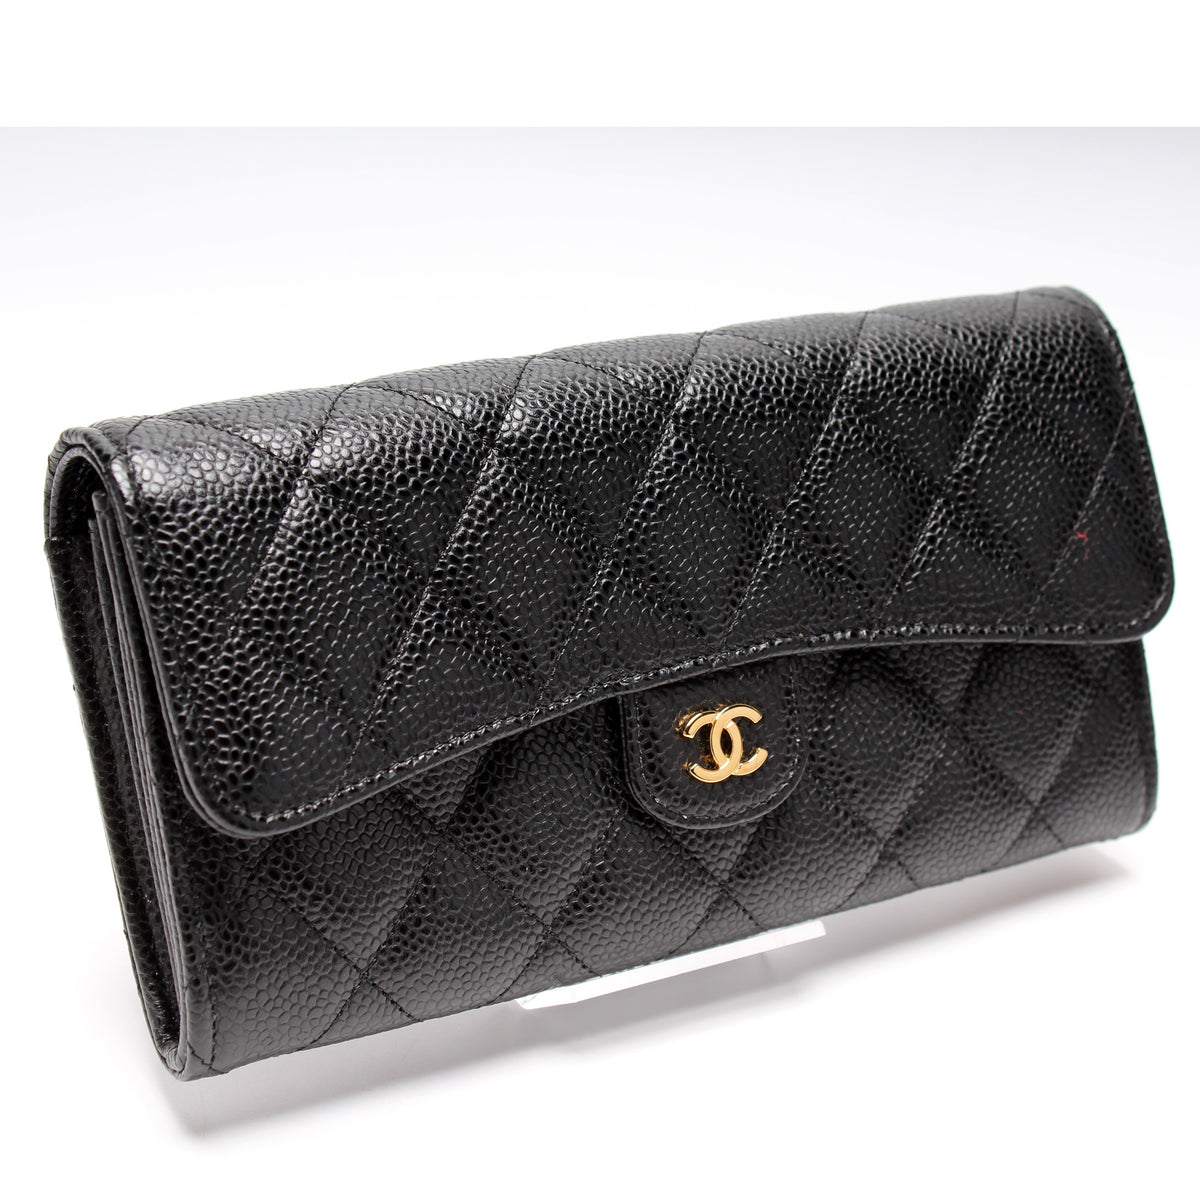 Chanel Small Classic Flap Wallet - 1 MONTH WEAR AND TEAR REVIEW